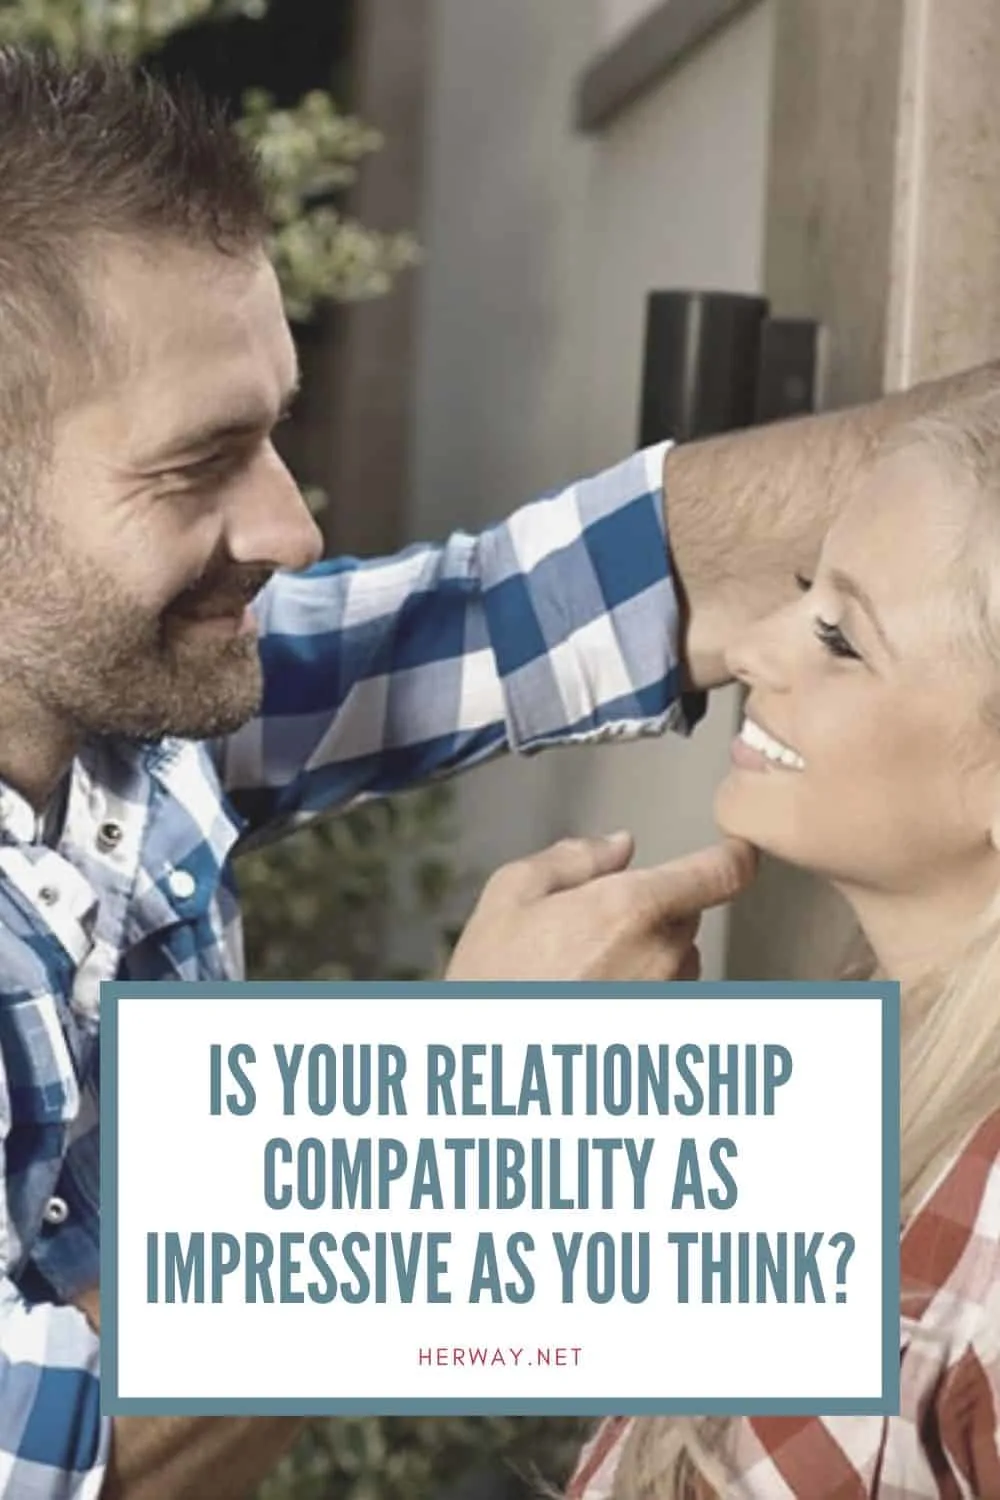 IS YOUR RELATIONSHIP COMPATIBILITY AS IMPRESSIVE AS YOU THINK?